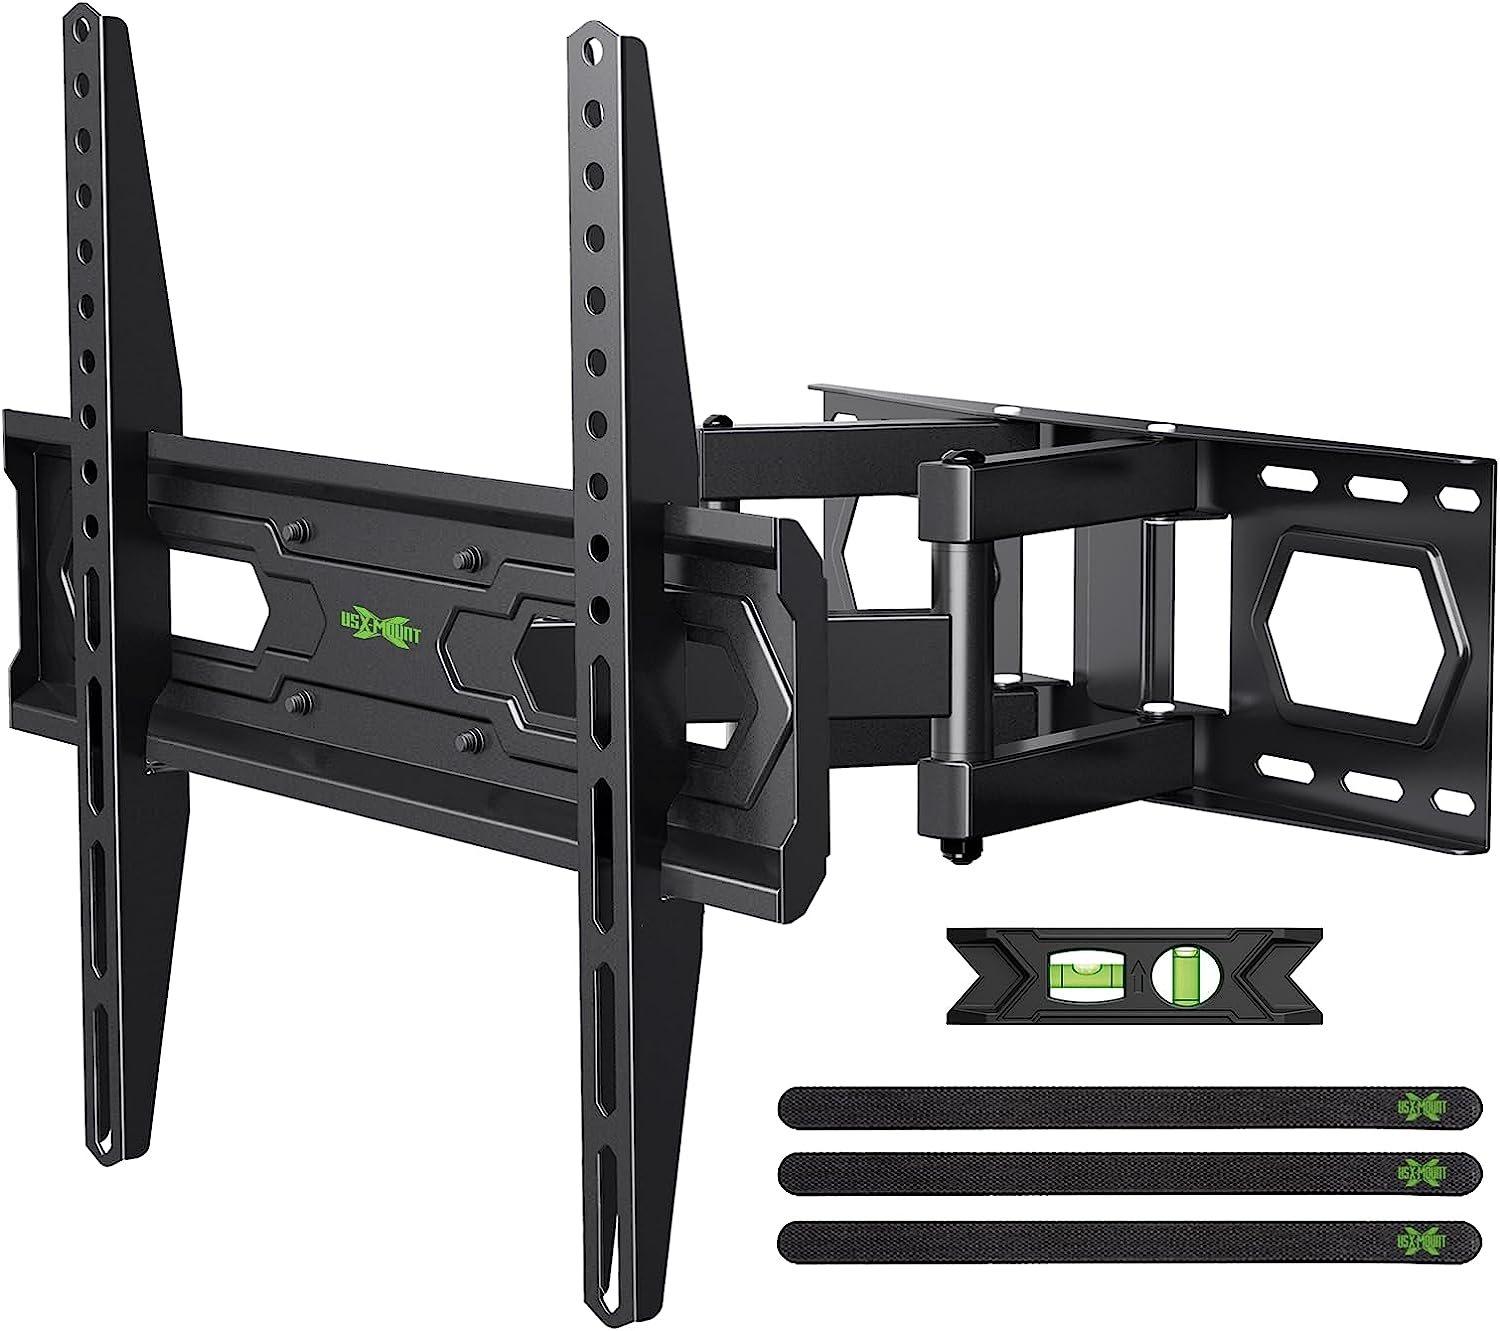 USX MOUNT Full Motion TV Wall Mount for Most 32